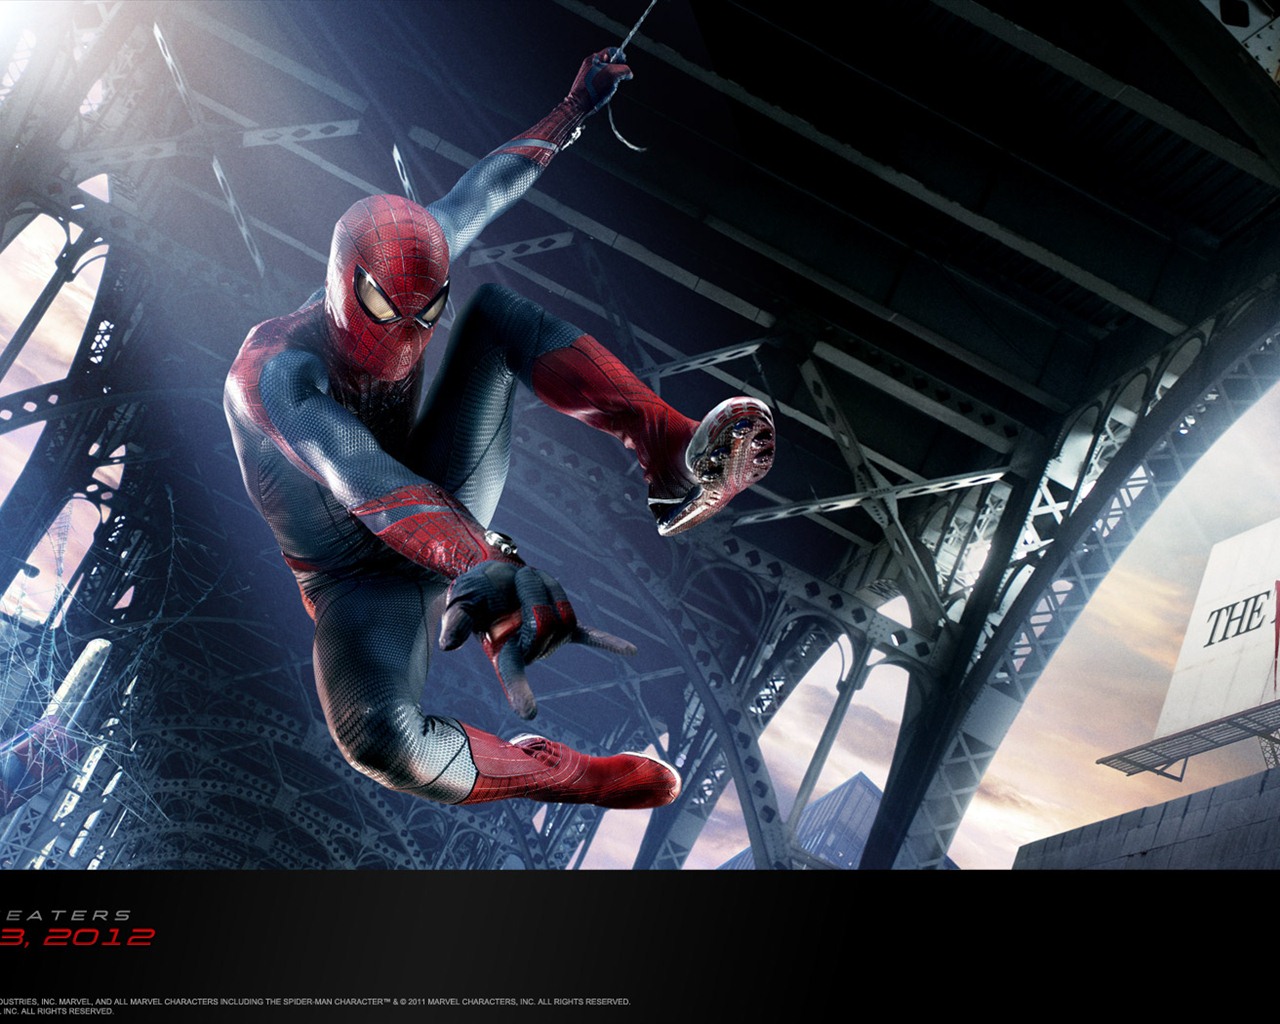 Le 2012 Amazing Spider-Man wallpapers #6 - 1280x1024